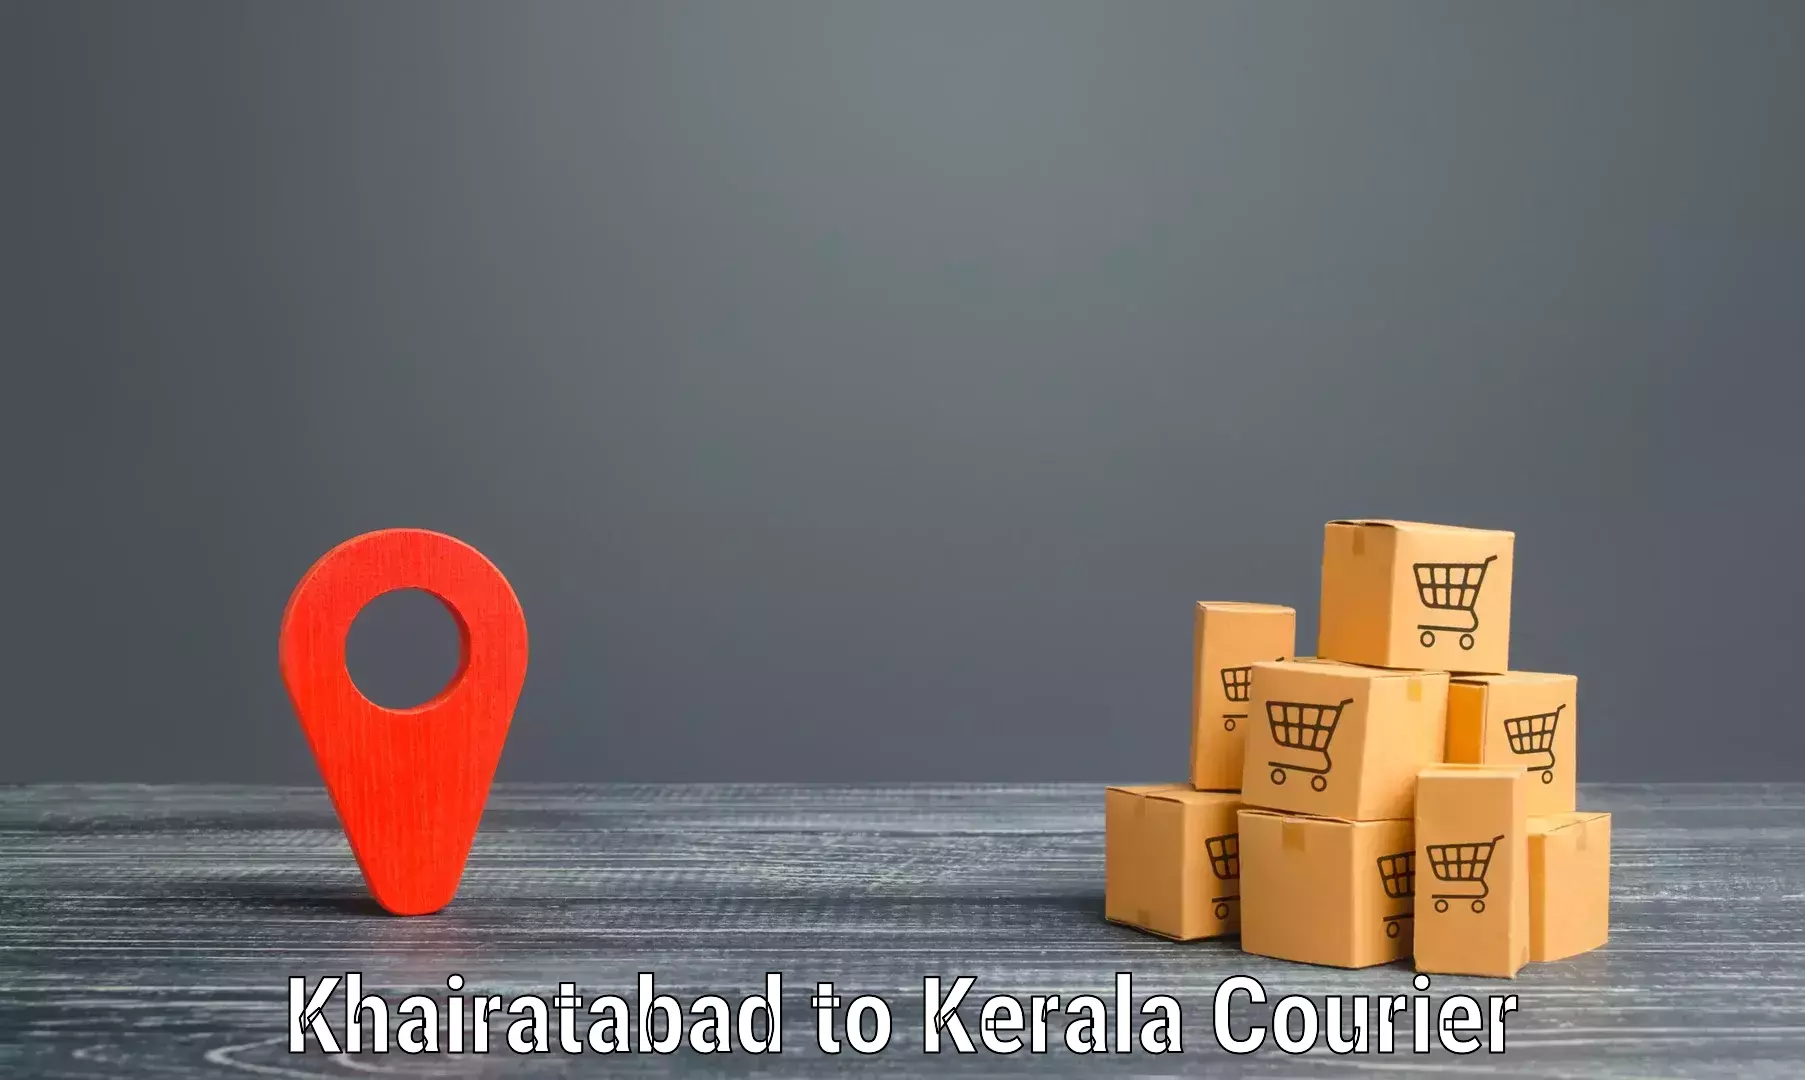 Round-the-clock parcel delivery Khairatabad to Kochi